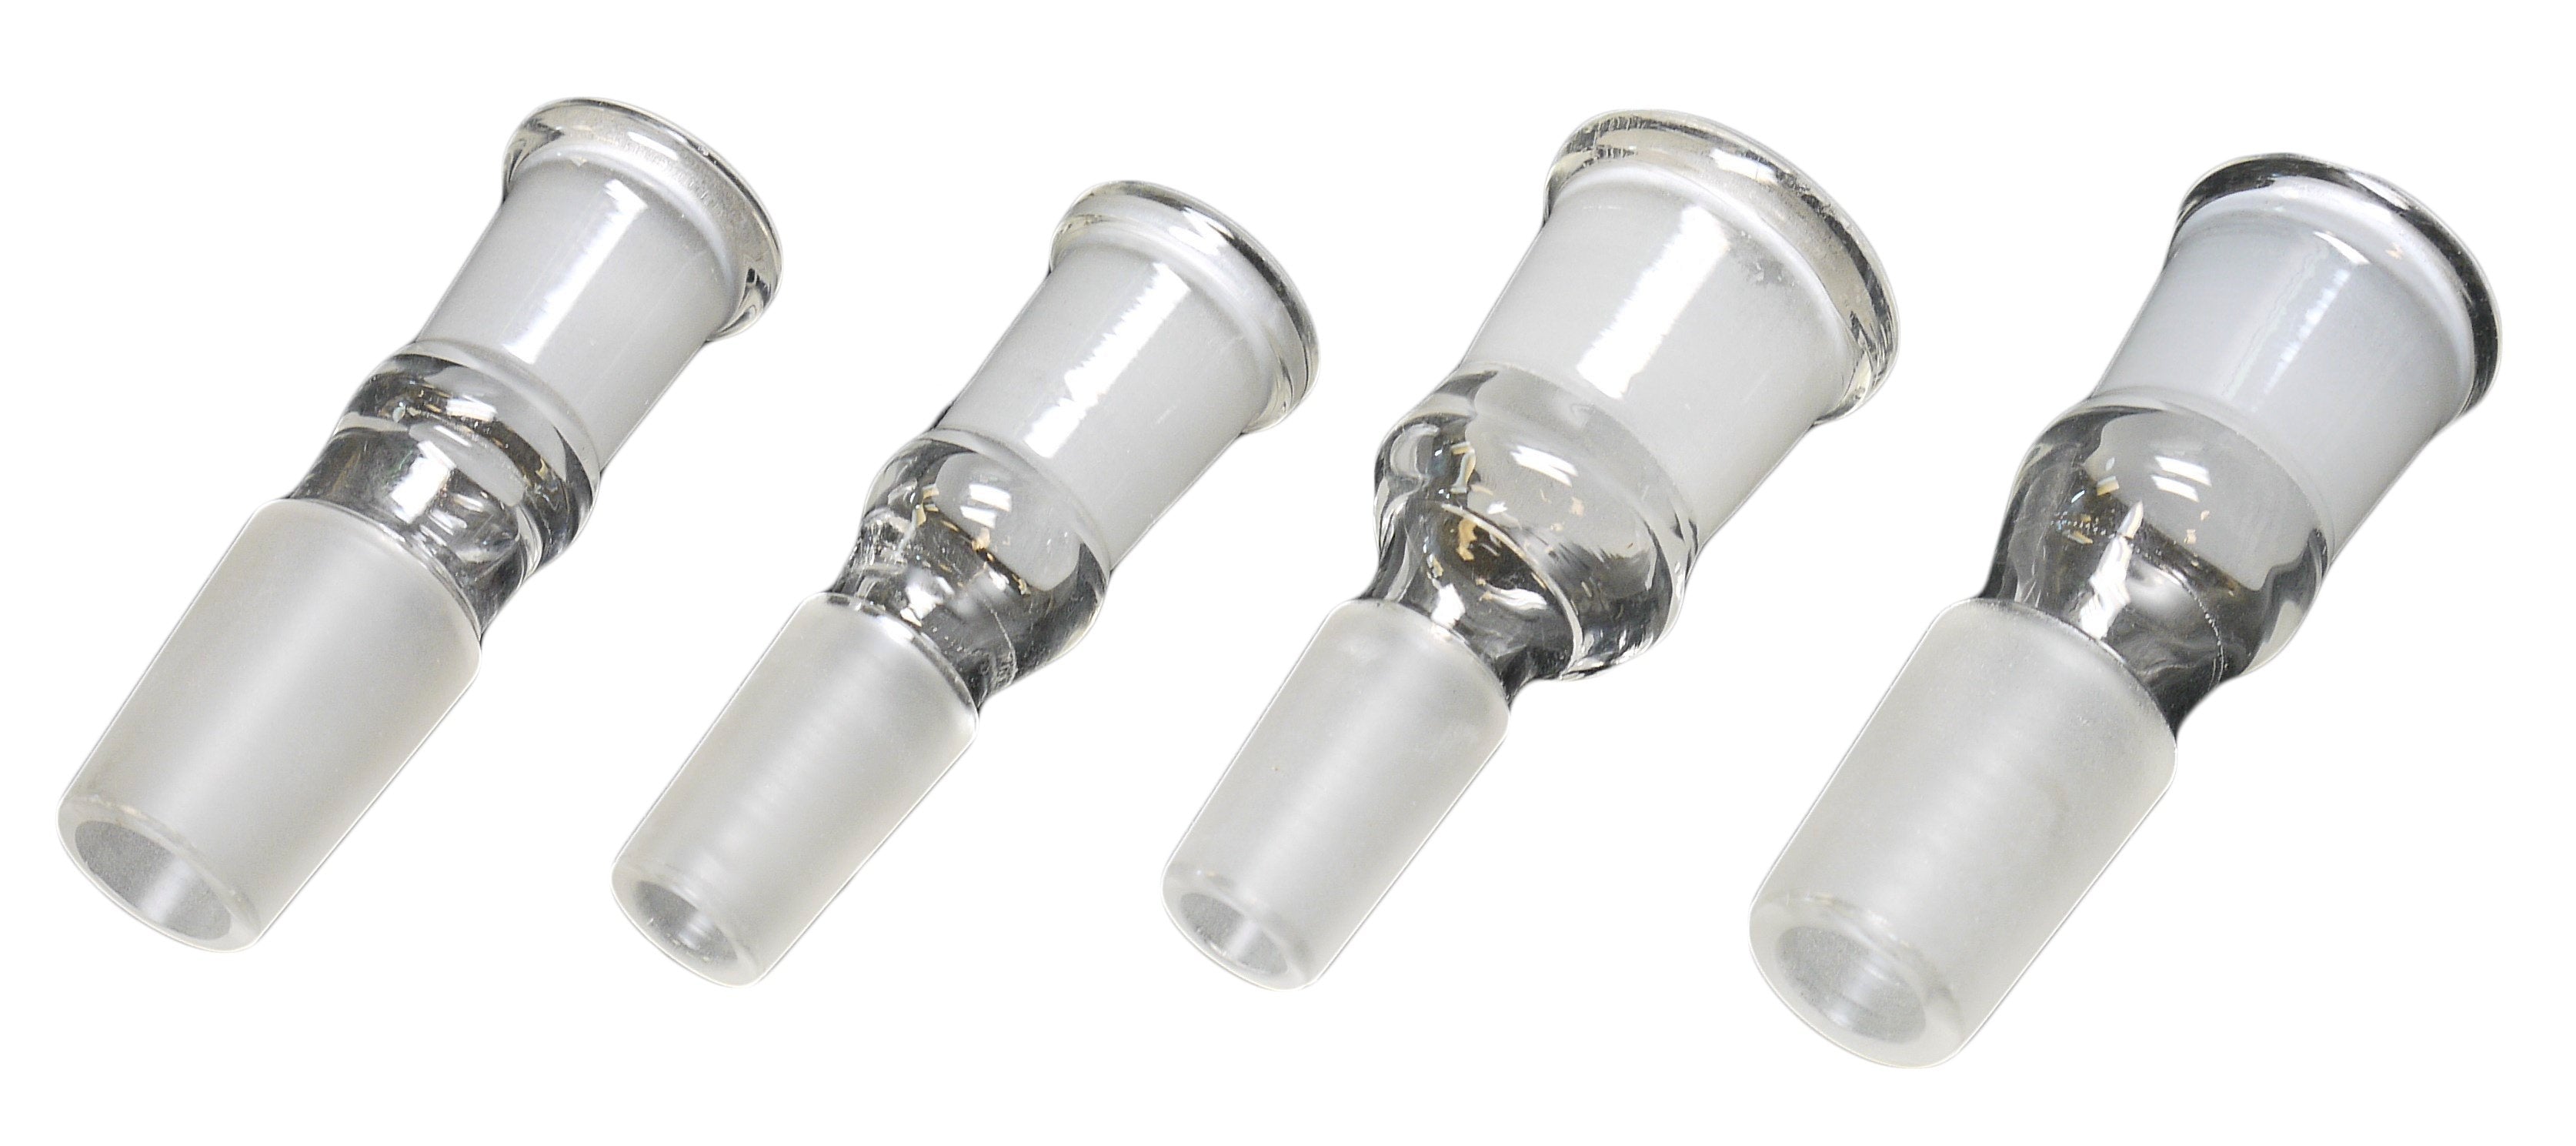 Male to Female connector 14mm to 14mm